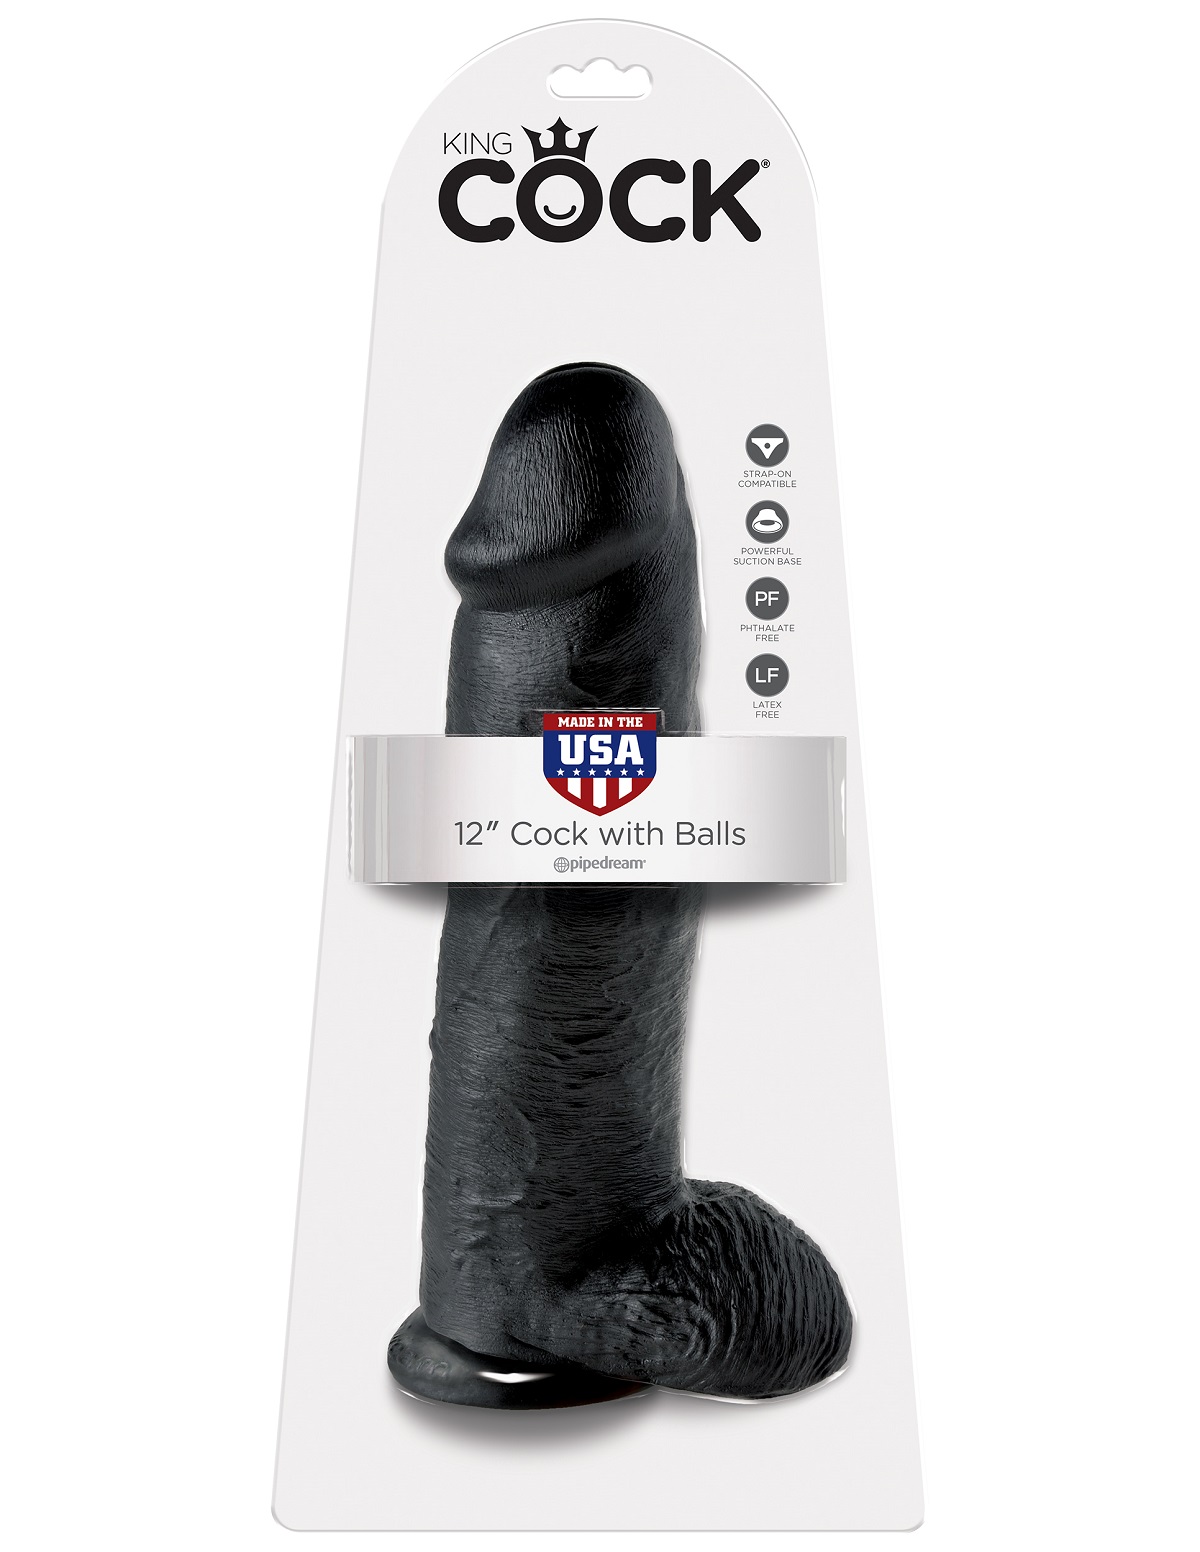    12 Cock with Balls  King Cock